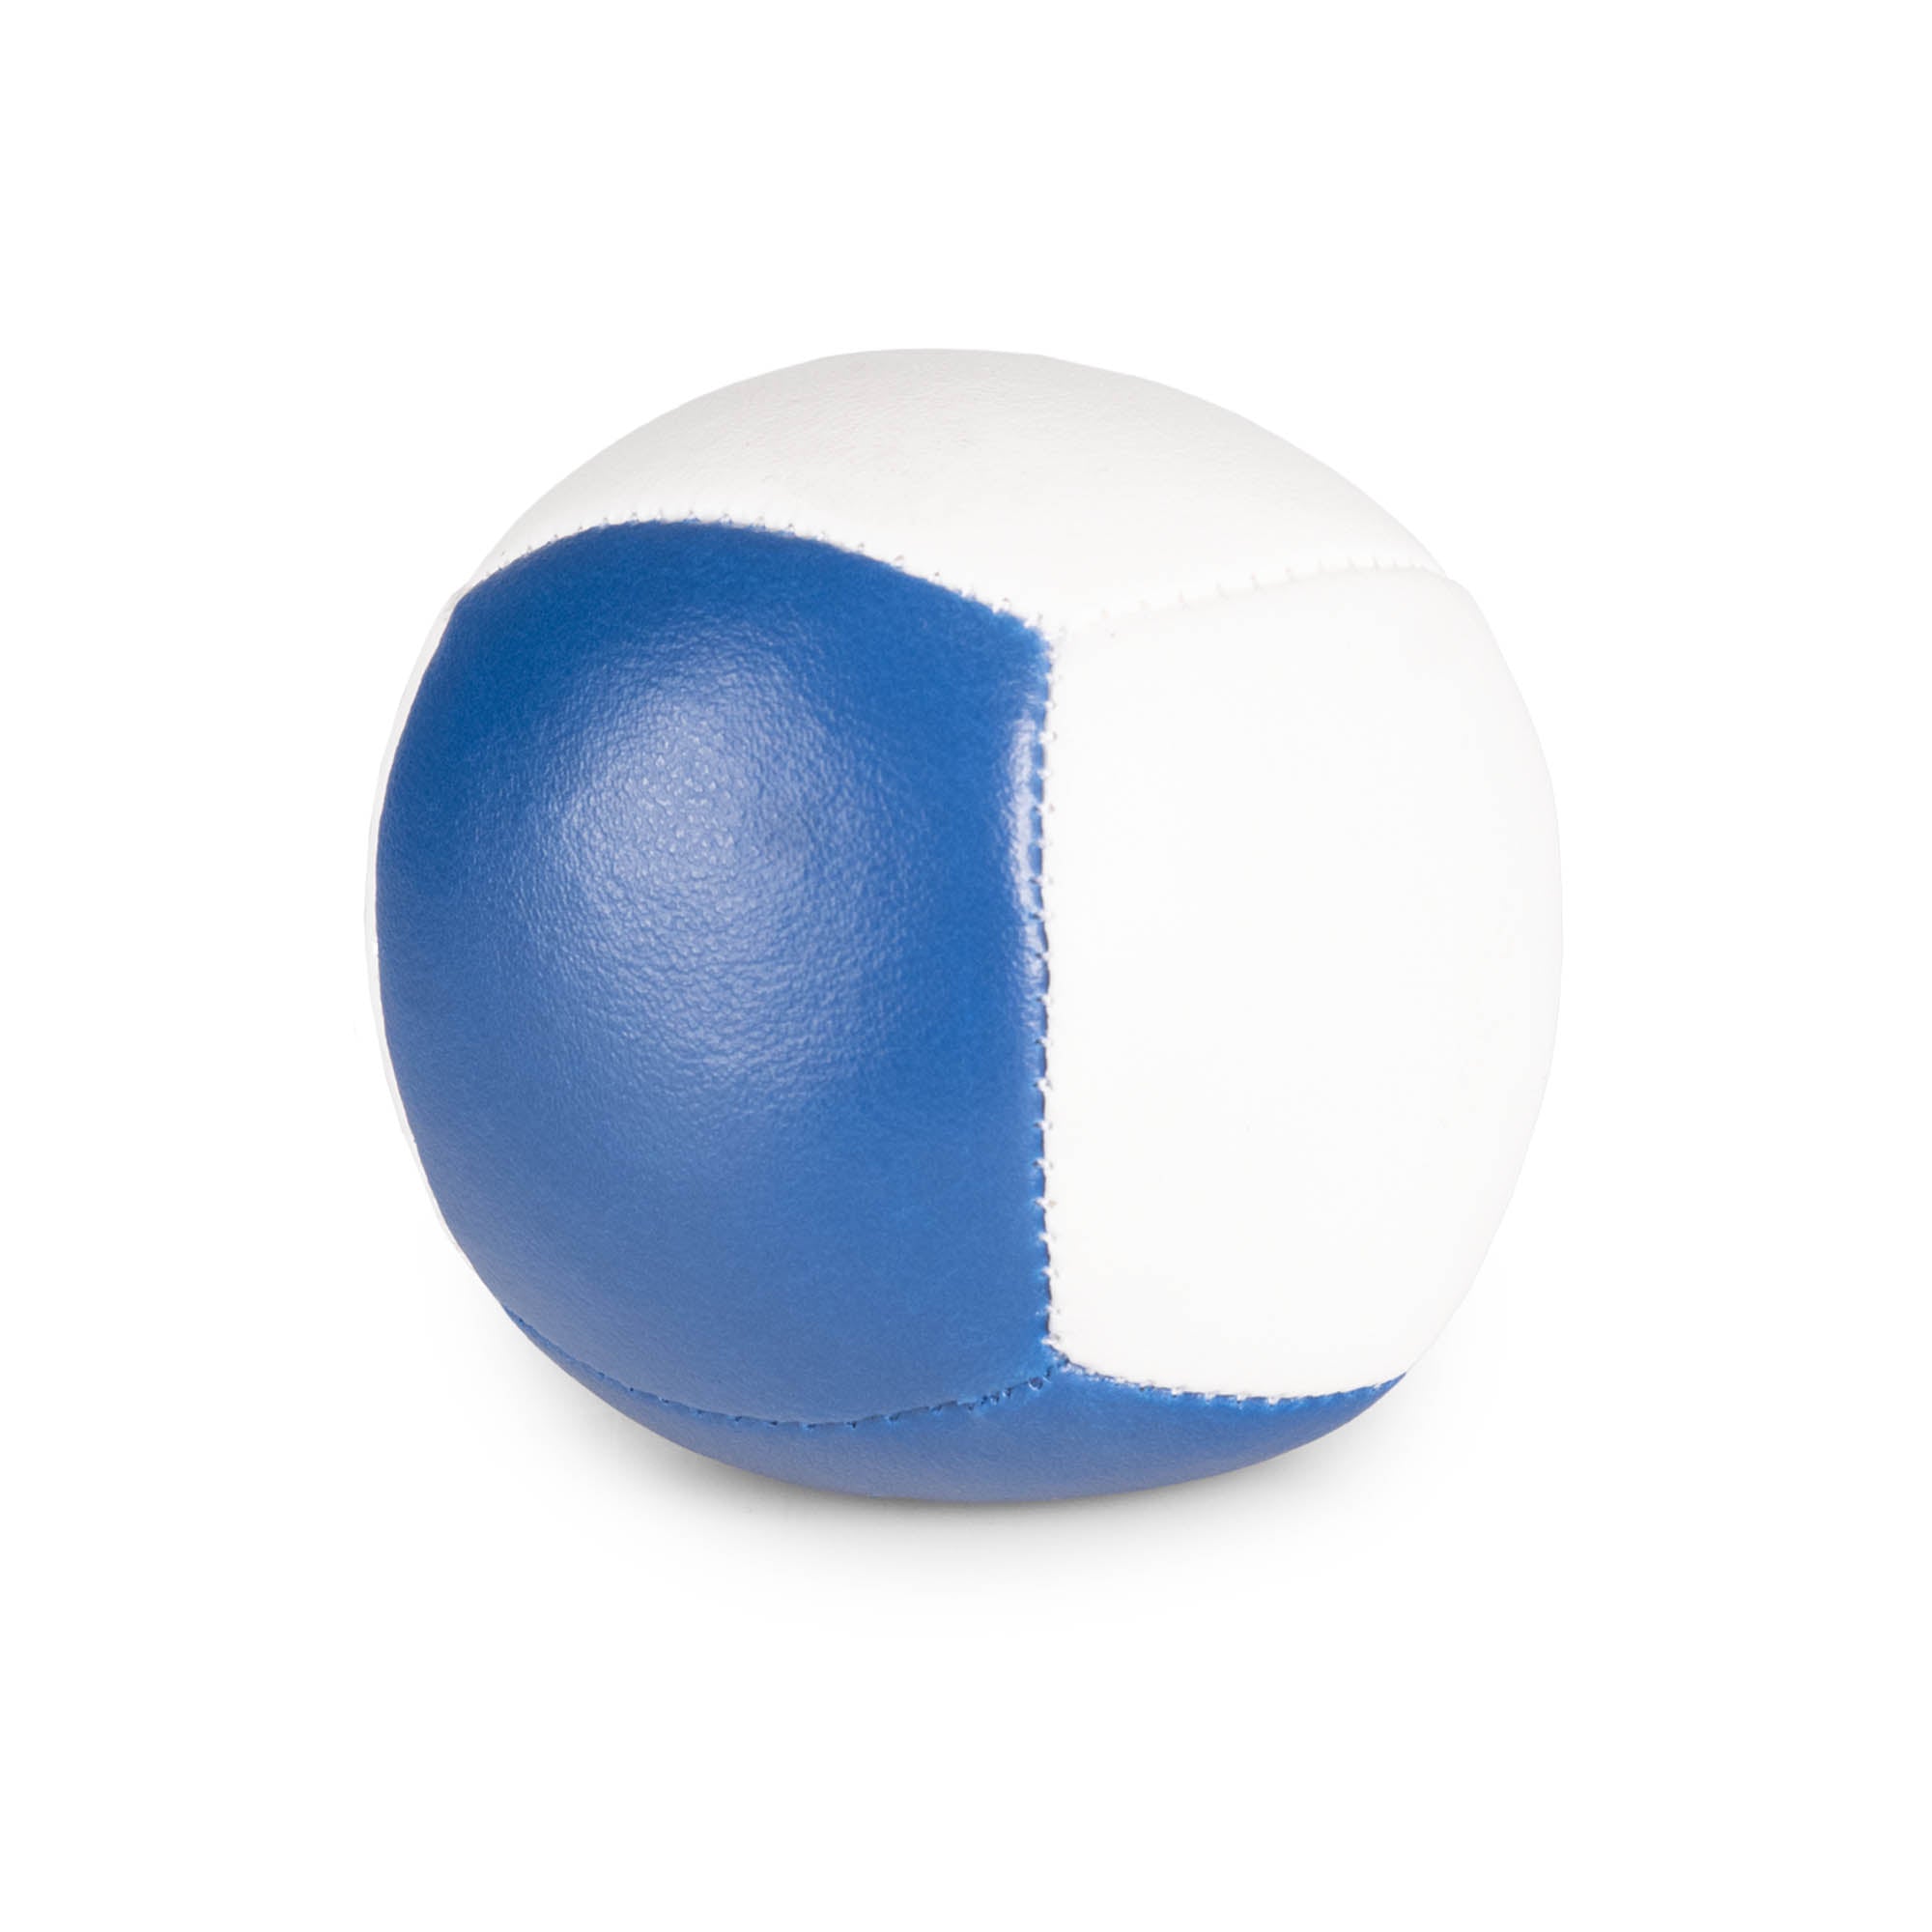 Firetoys blue/white 110g thud juggling ball, straight on in a white background